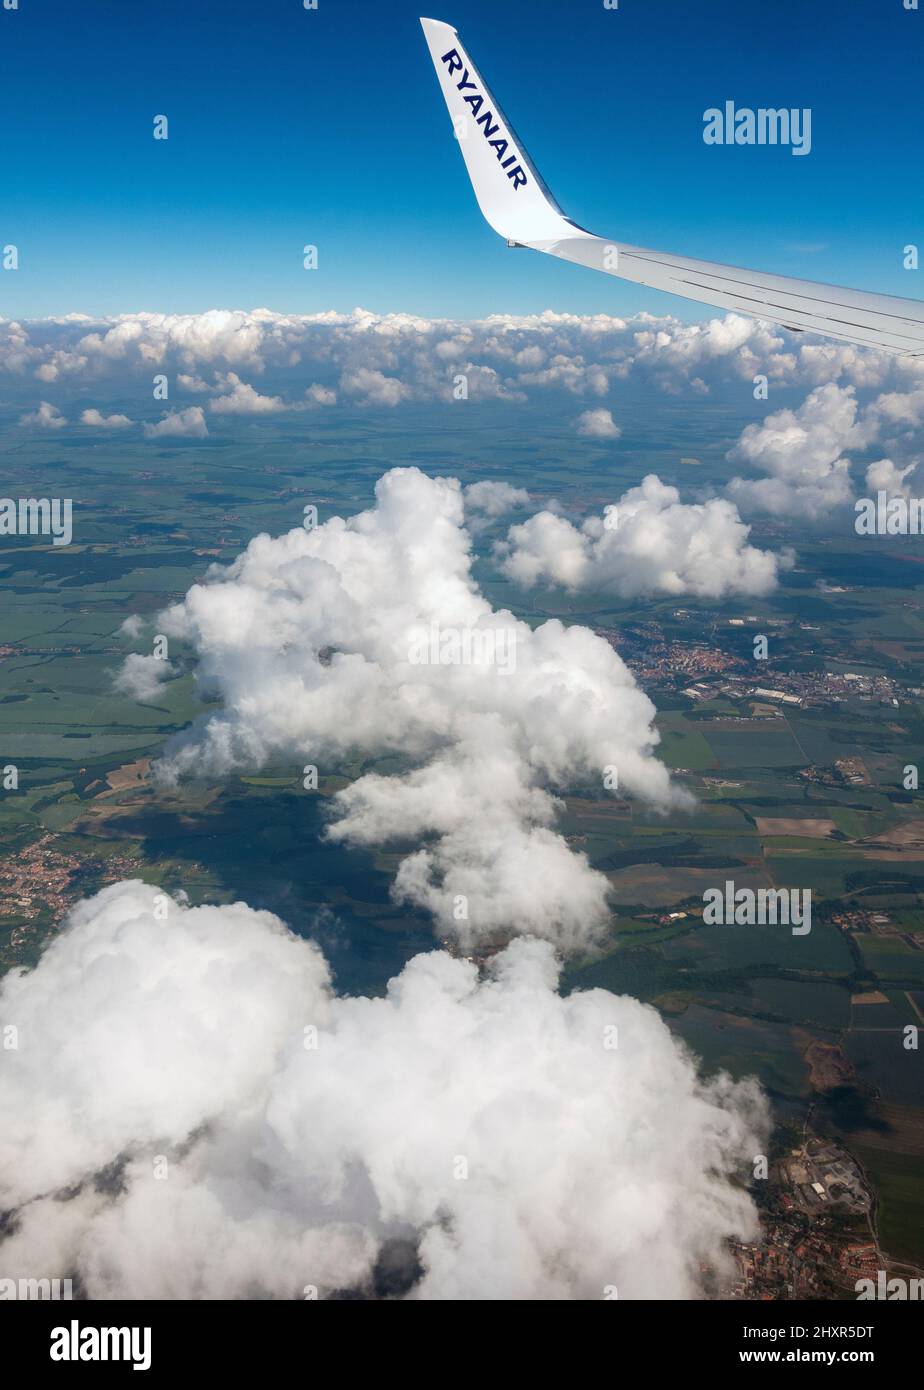 Ryanair aeroplane flying above the clouds showing Ryanair wing tip and logo Stock Photo